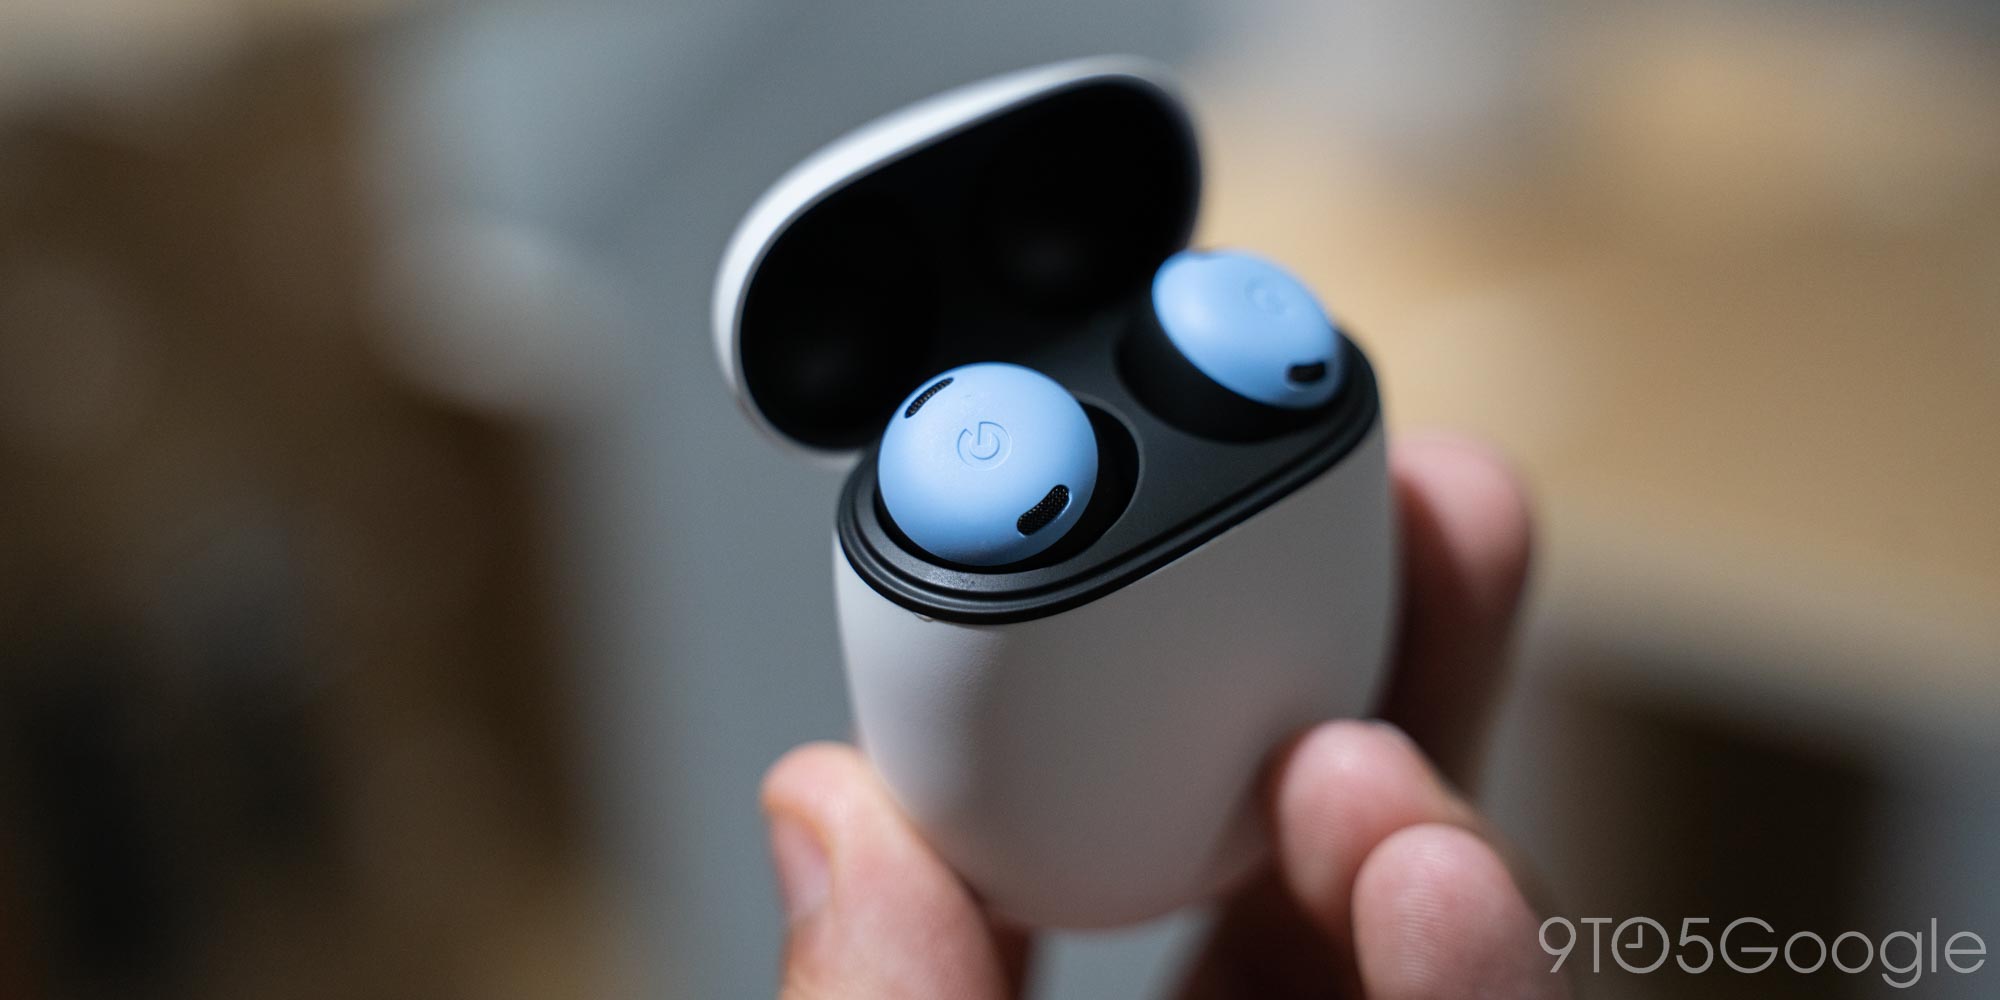 Google Pixel Buds Pro now come in refreshed Bay and Porcelain